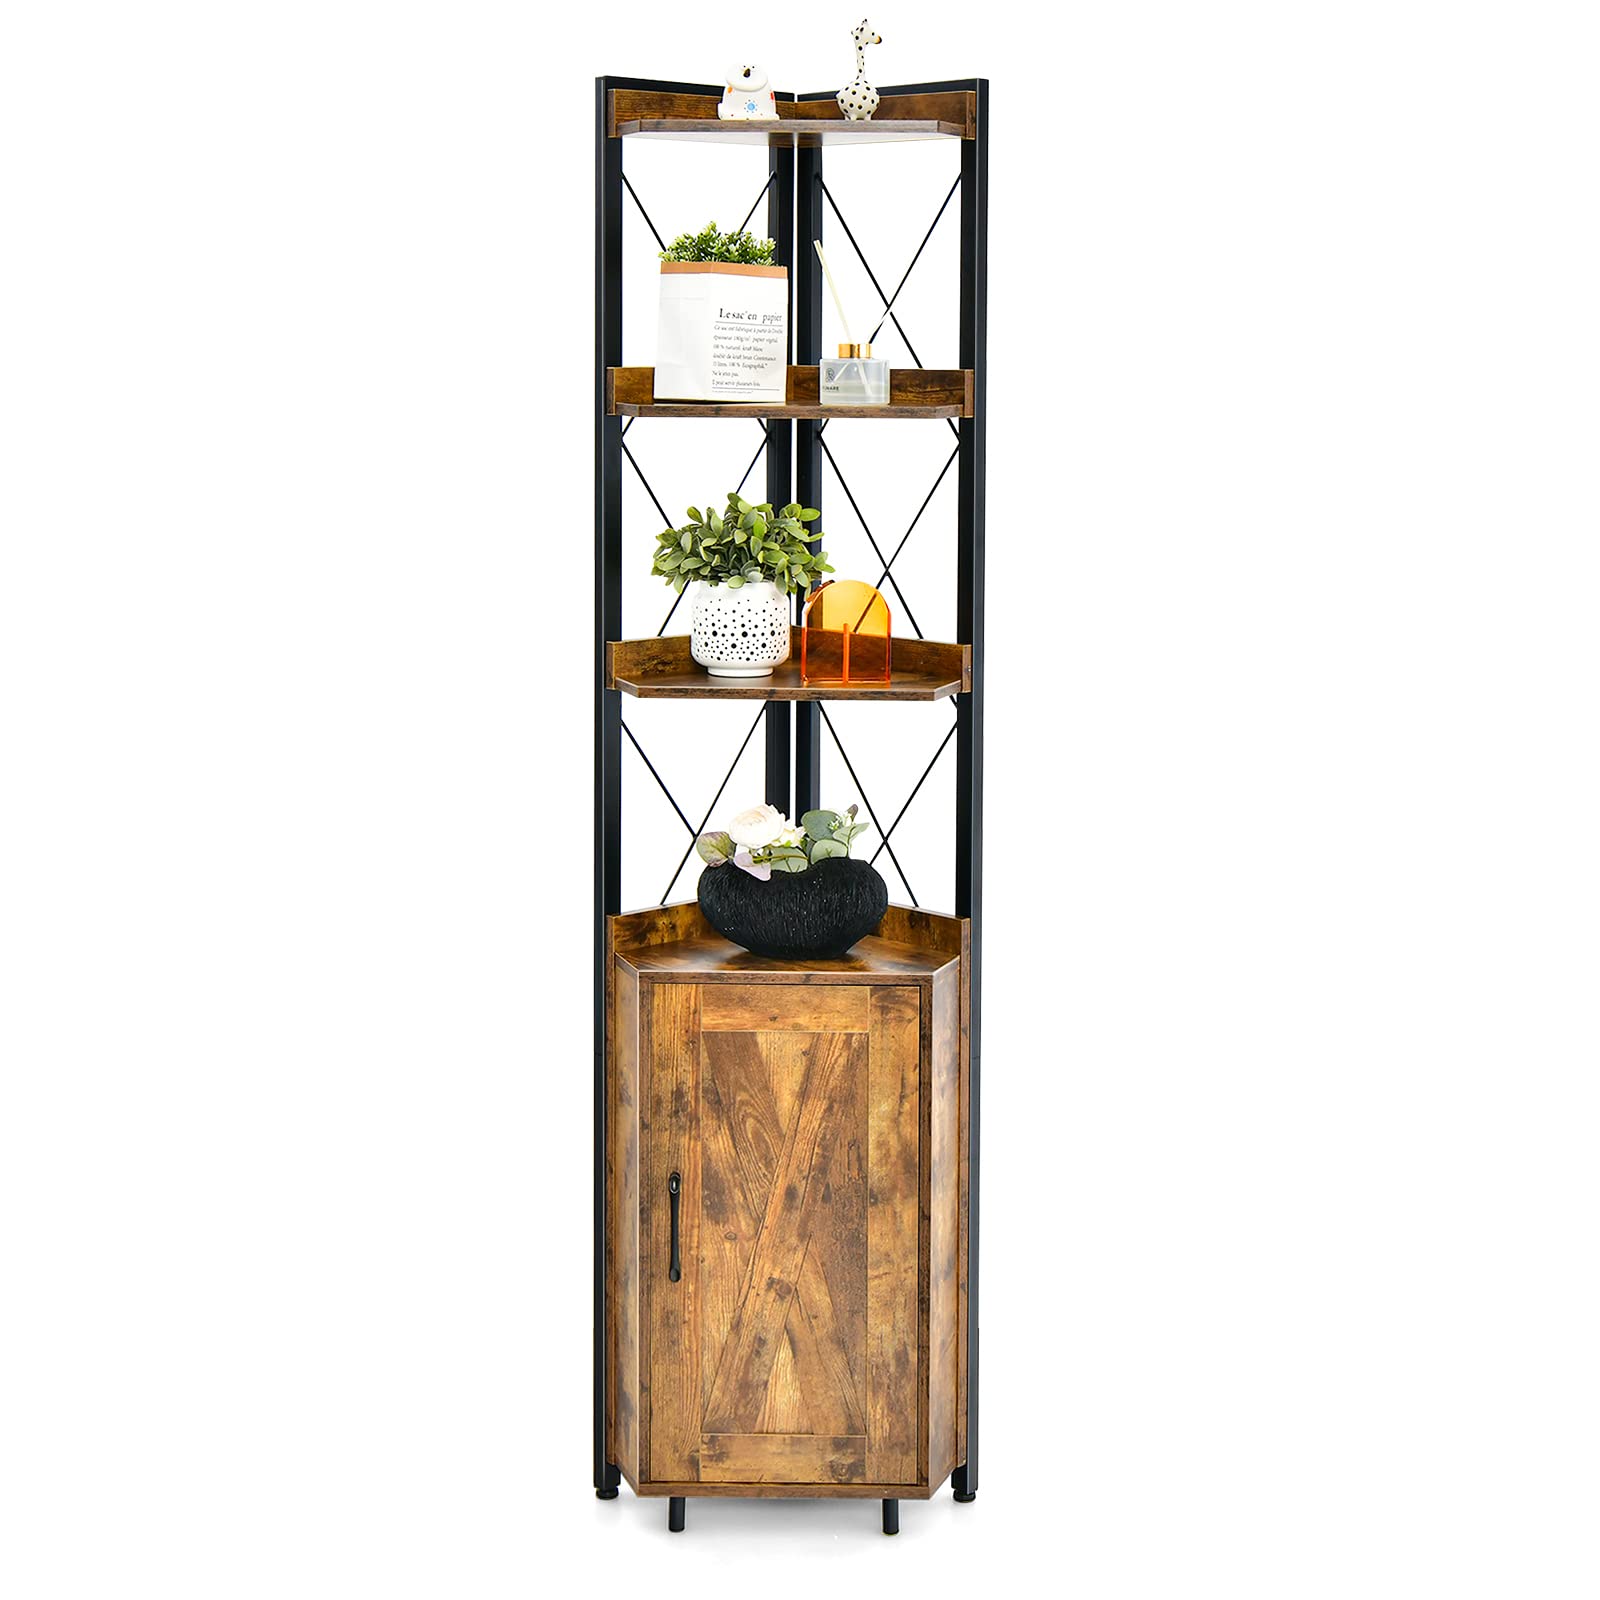 Giantex 4-Tier Corner Shelf with Cabinet - 71" Tall Free Standing Storage Shelves Rack Plant Stand (Rustic Brown)